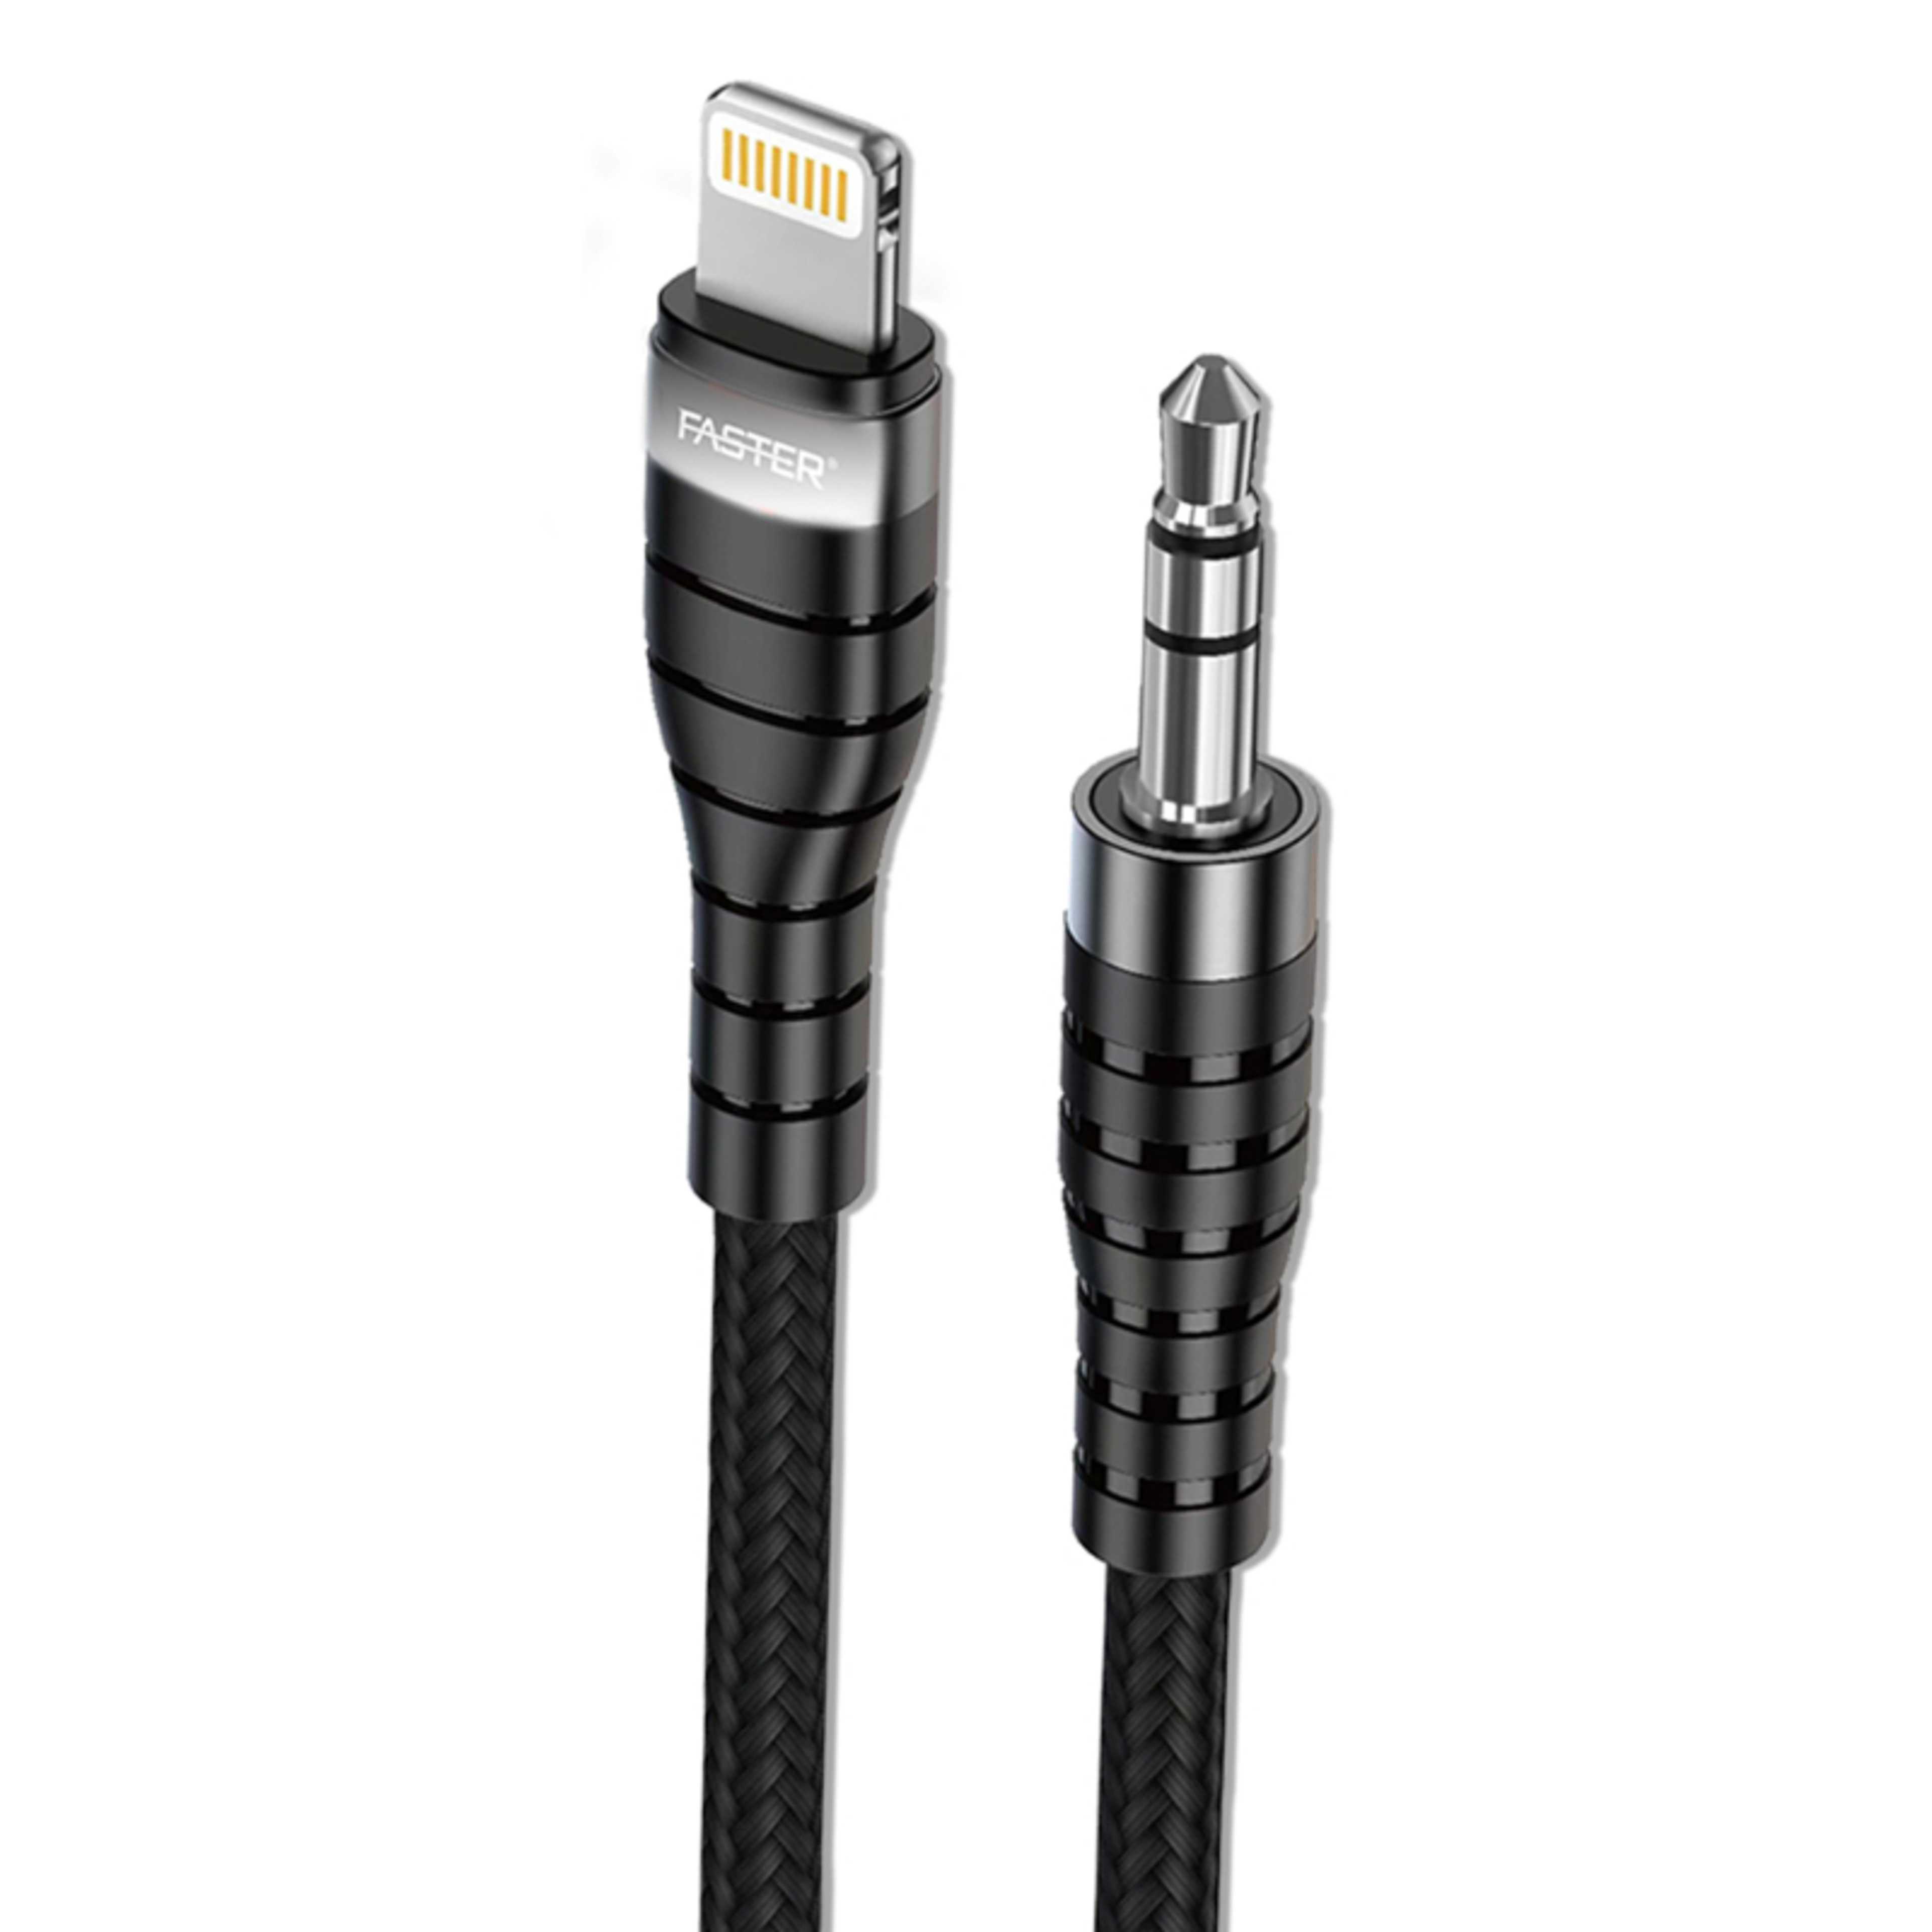 FASTER M1 Audio Cable for Lightning to 3.5mm Port